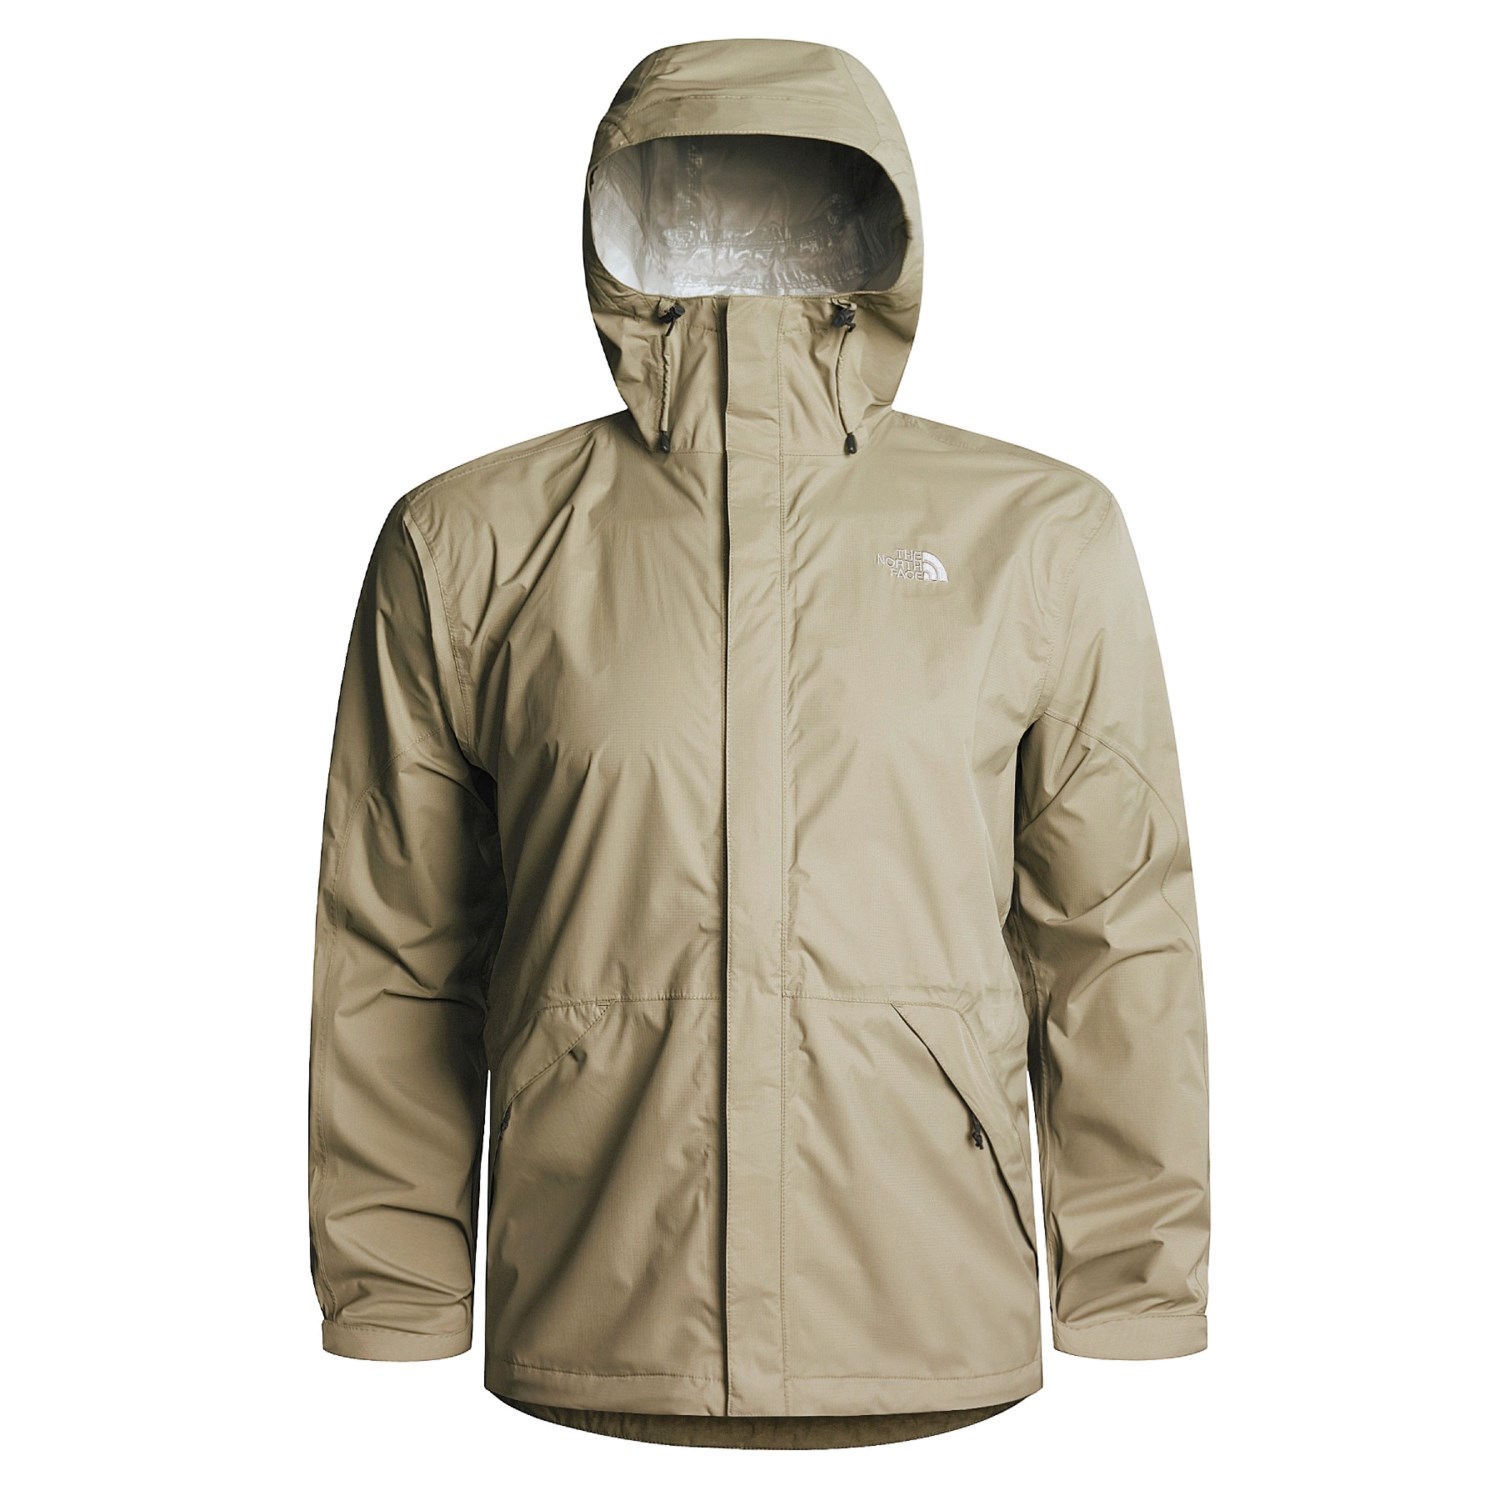 The North Face Venture Shell Jacket (For Men) 1278J